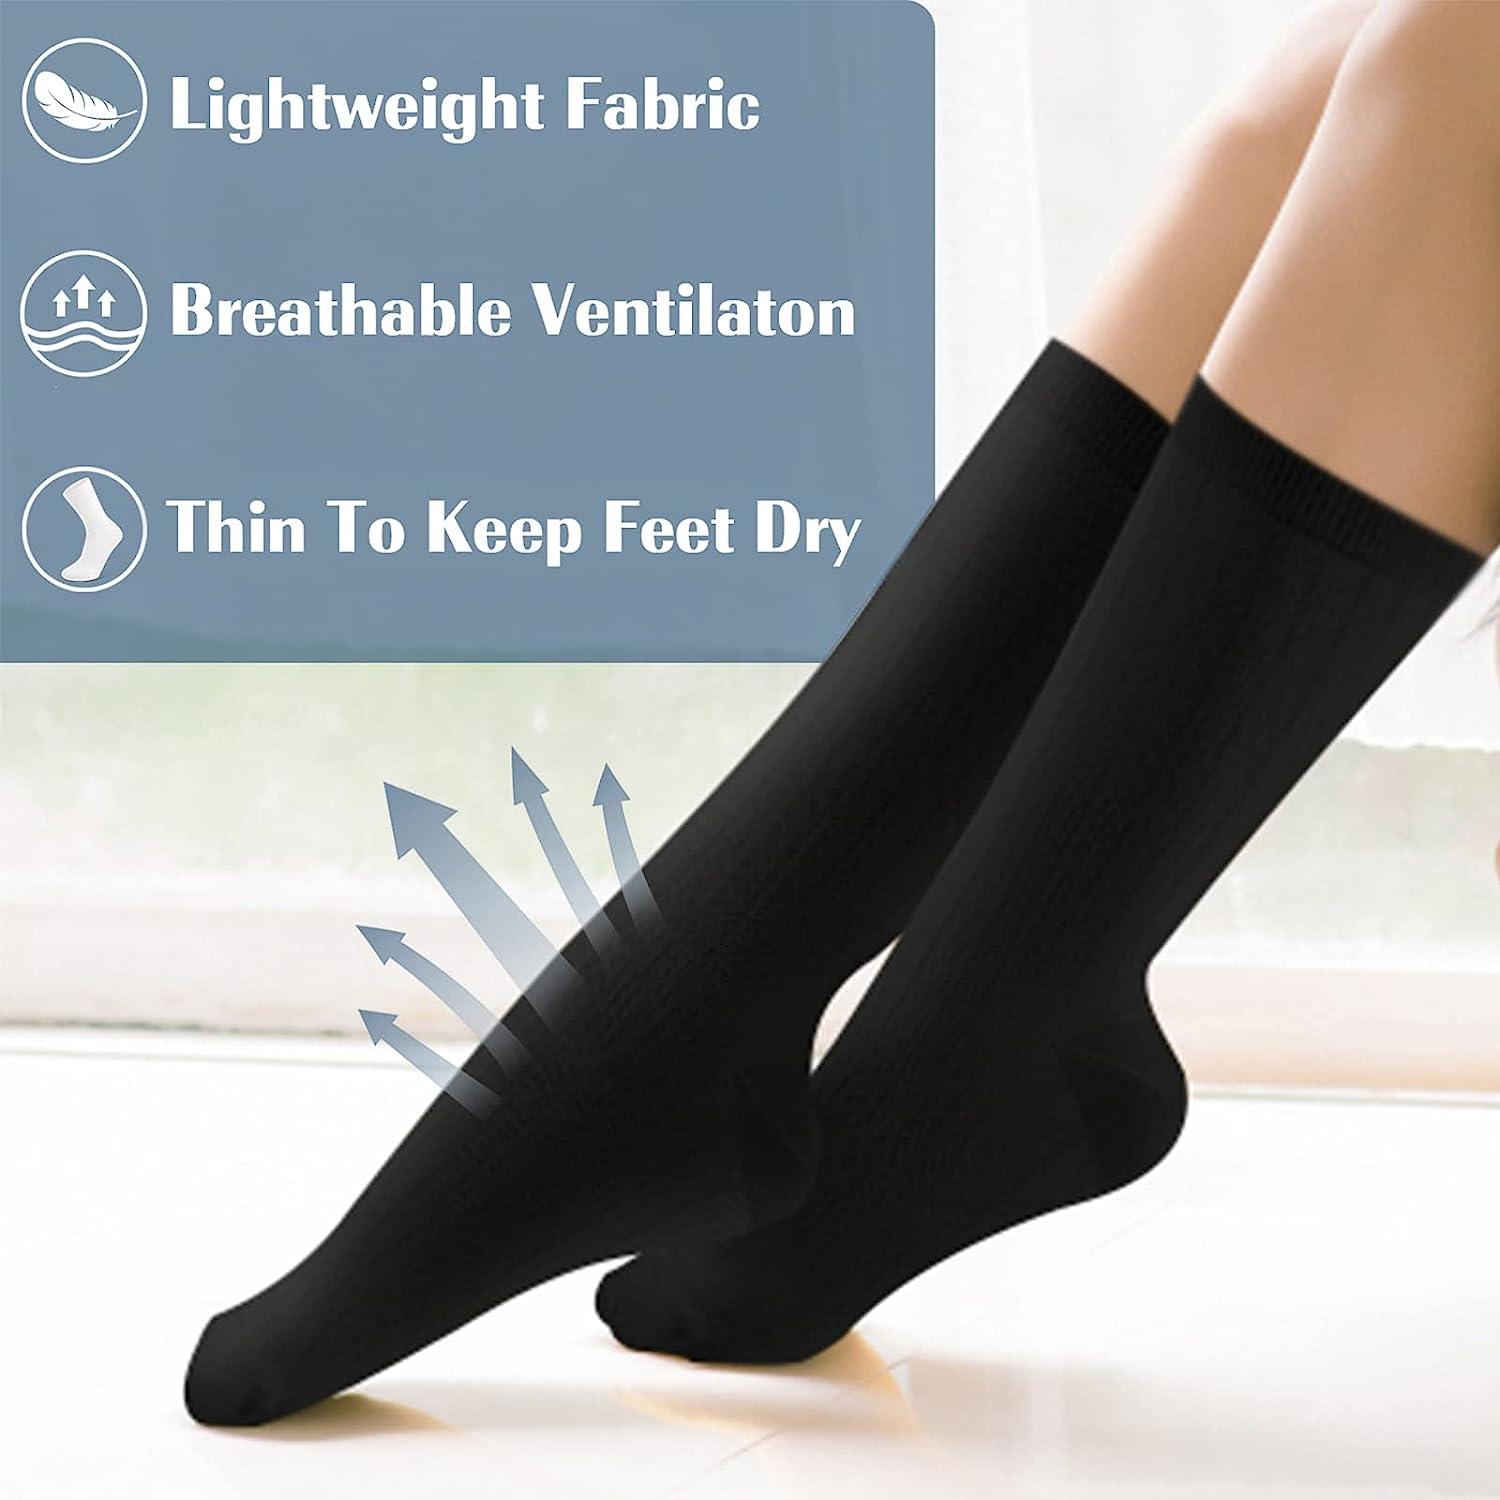 Extreme Fit Compression Socks - Pro Support Stockings hose made for nurses  travel pregnancy foot aches running - 3 Pair - Large/X-Large